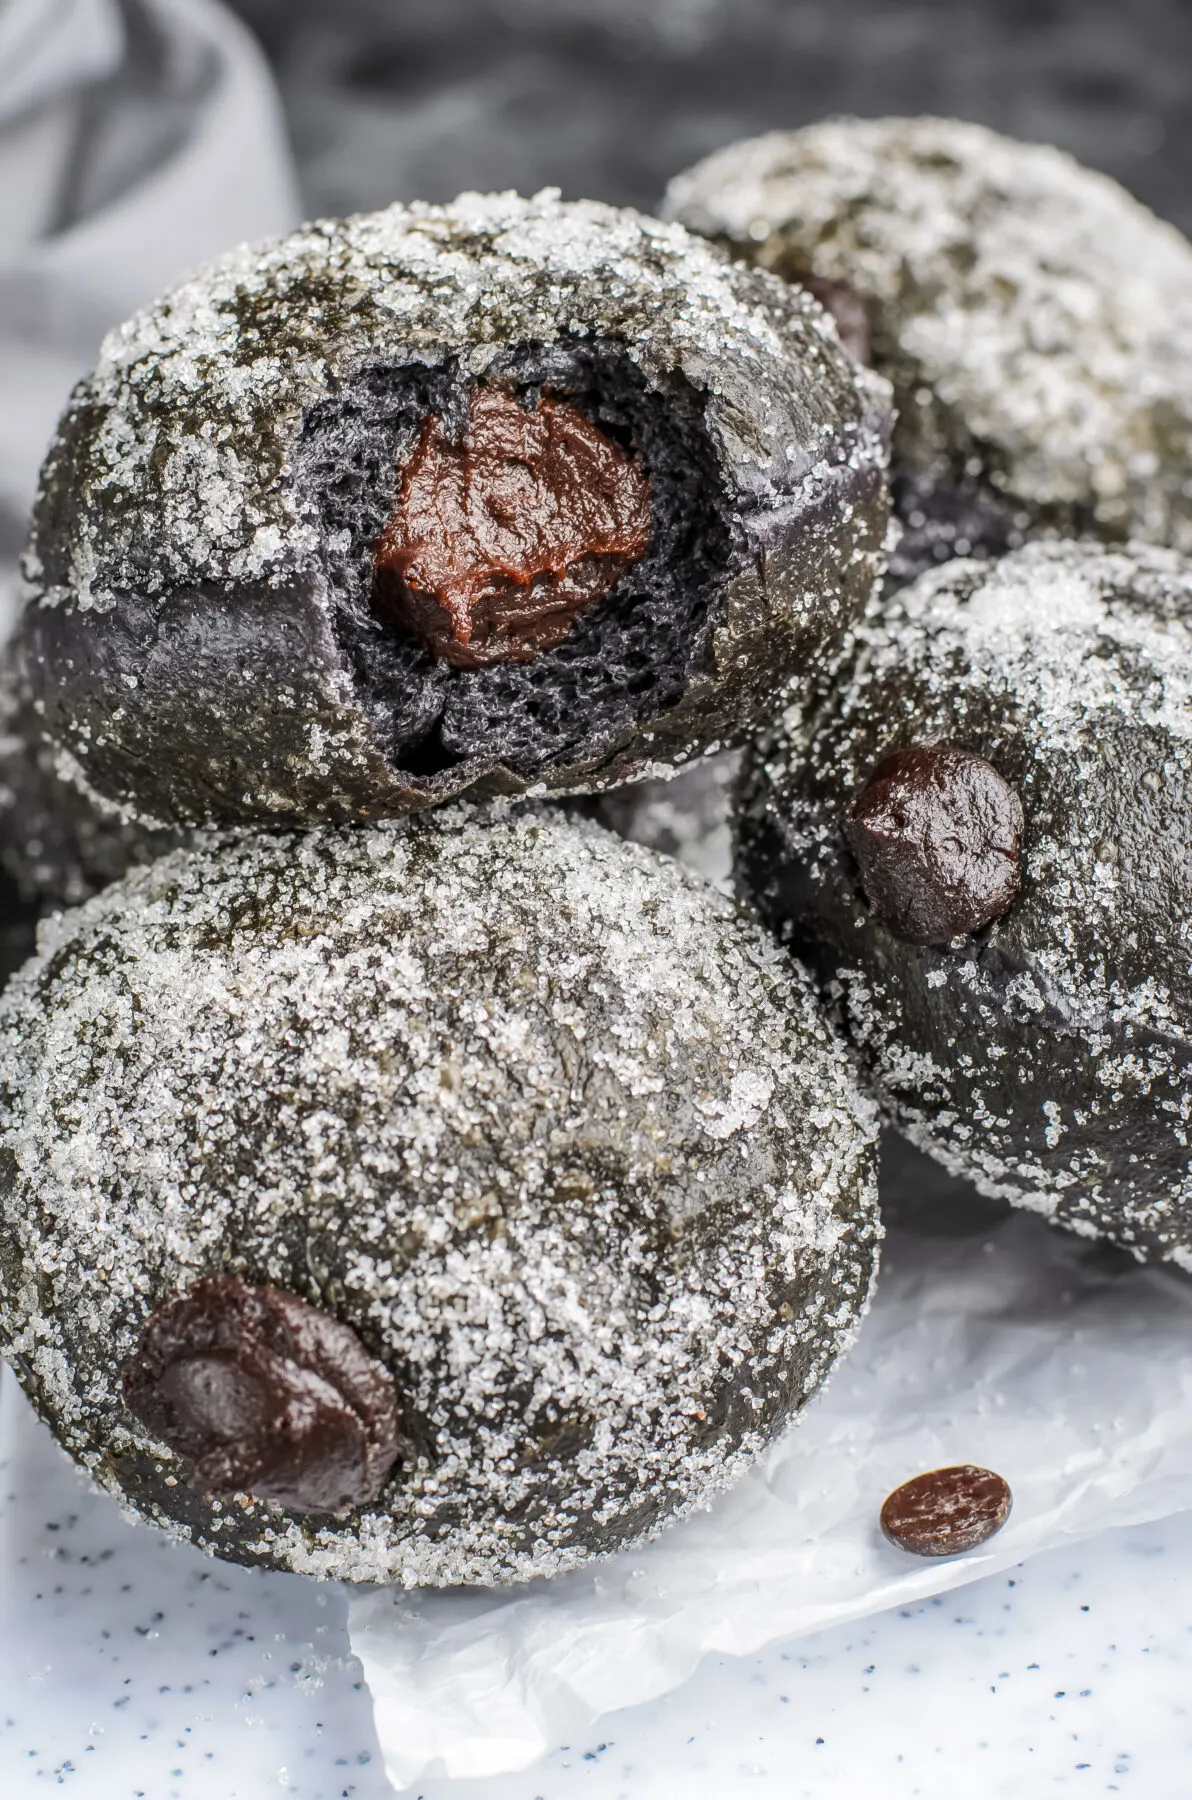 Light and crisp, these Black Charcoal Donuts with Dark Chocolate Custard are made with charcoal and filled with rich dark chocolate custard.